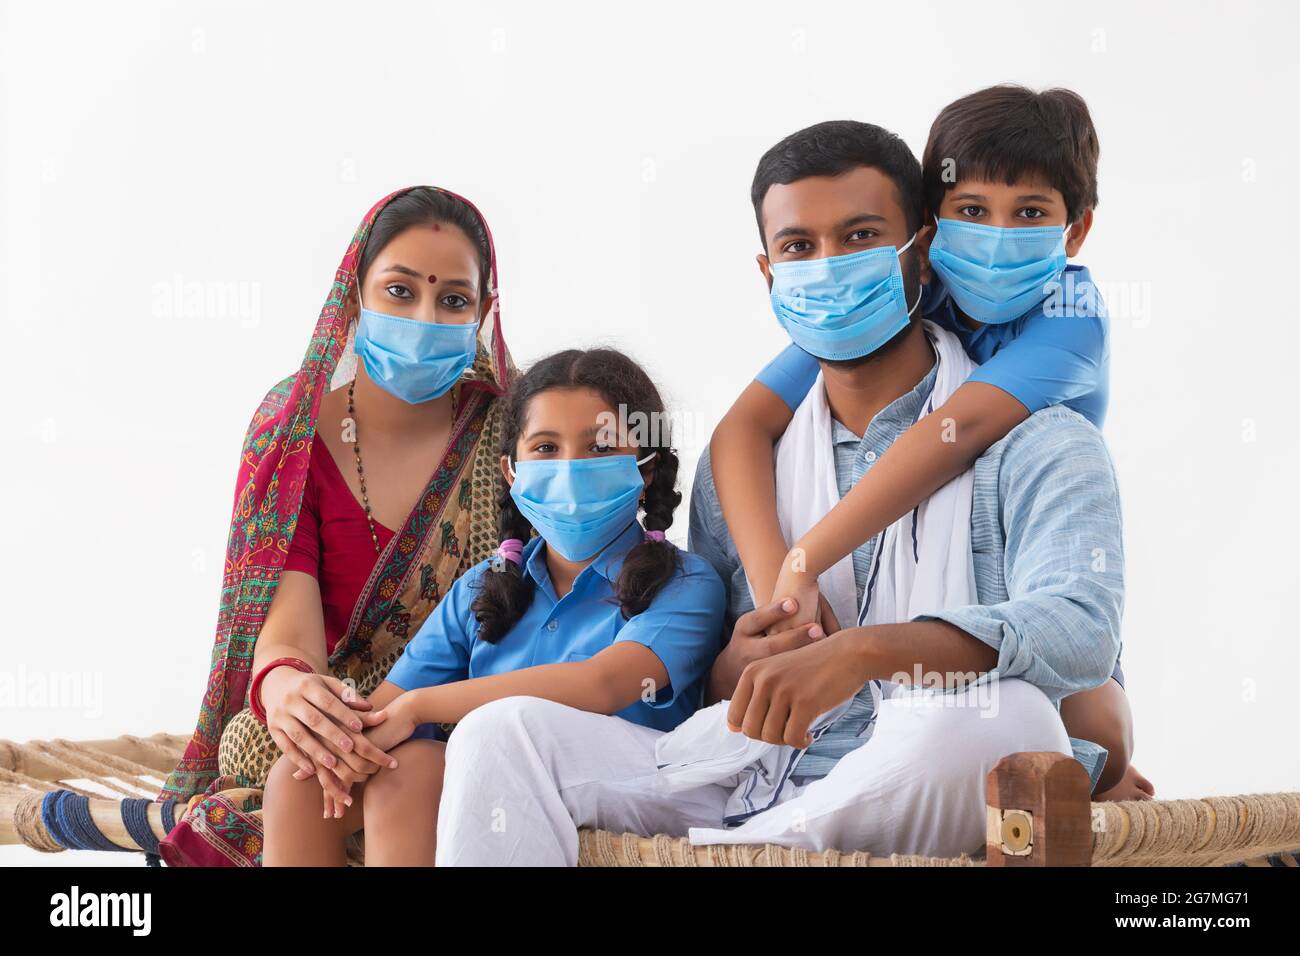 PORTRAIT OF A RURAL FAMILY WEARING MASKS AND LOOKING AT CAMERA Stock Photo